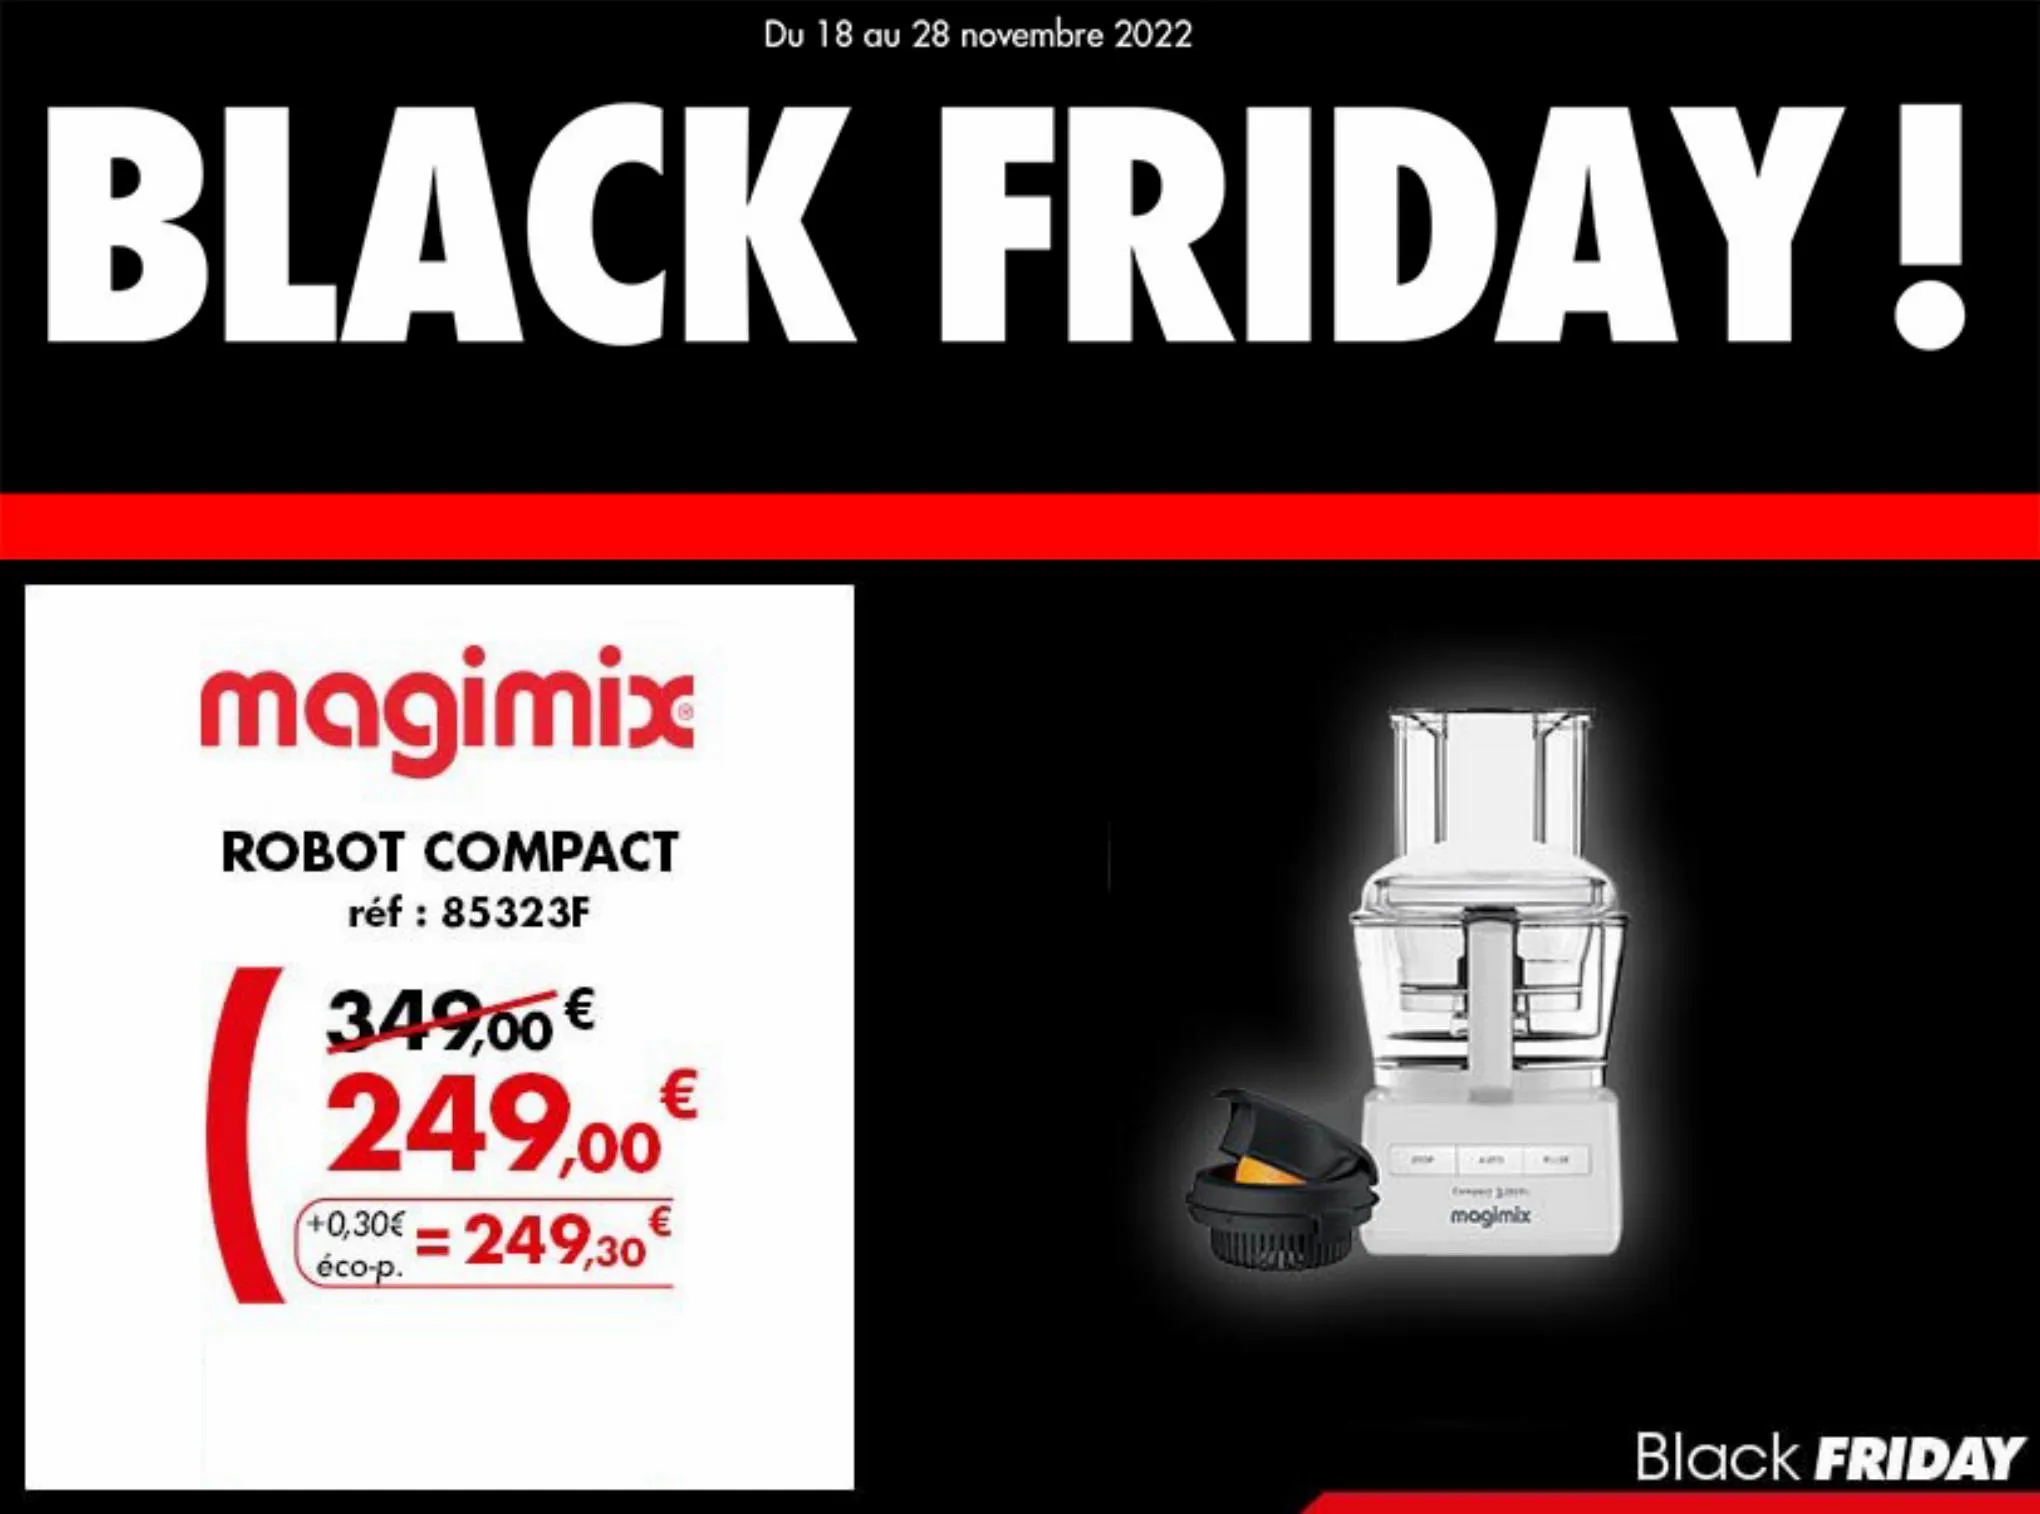 Catalogue Black Friday offres!, page 00004